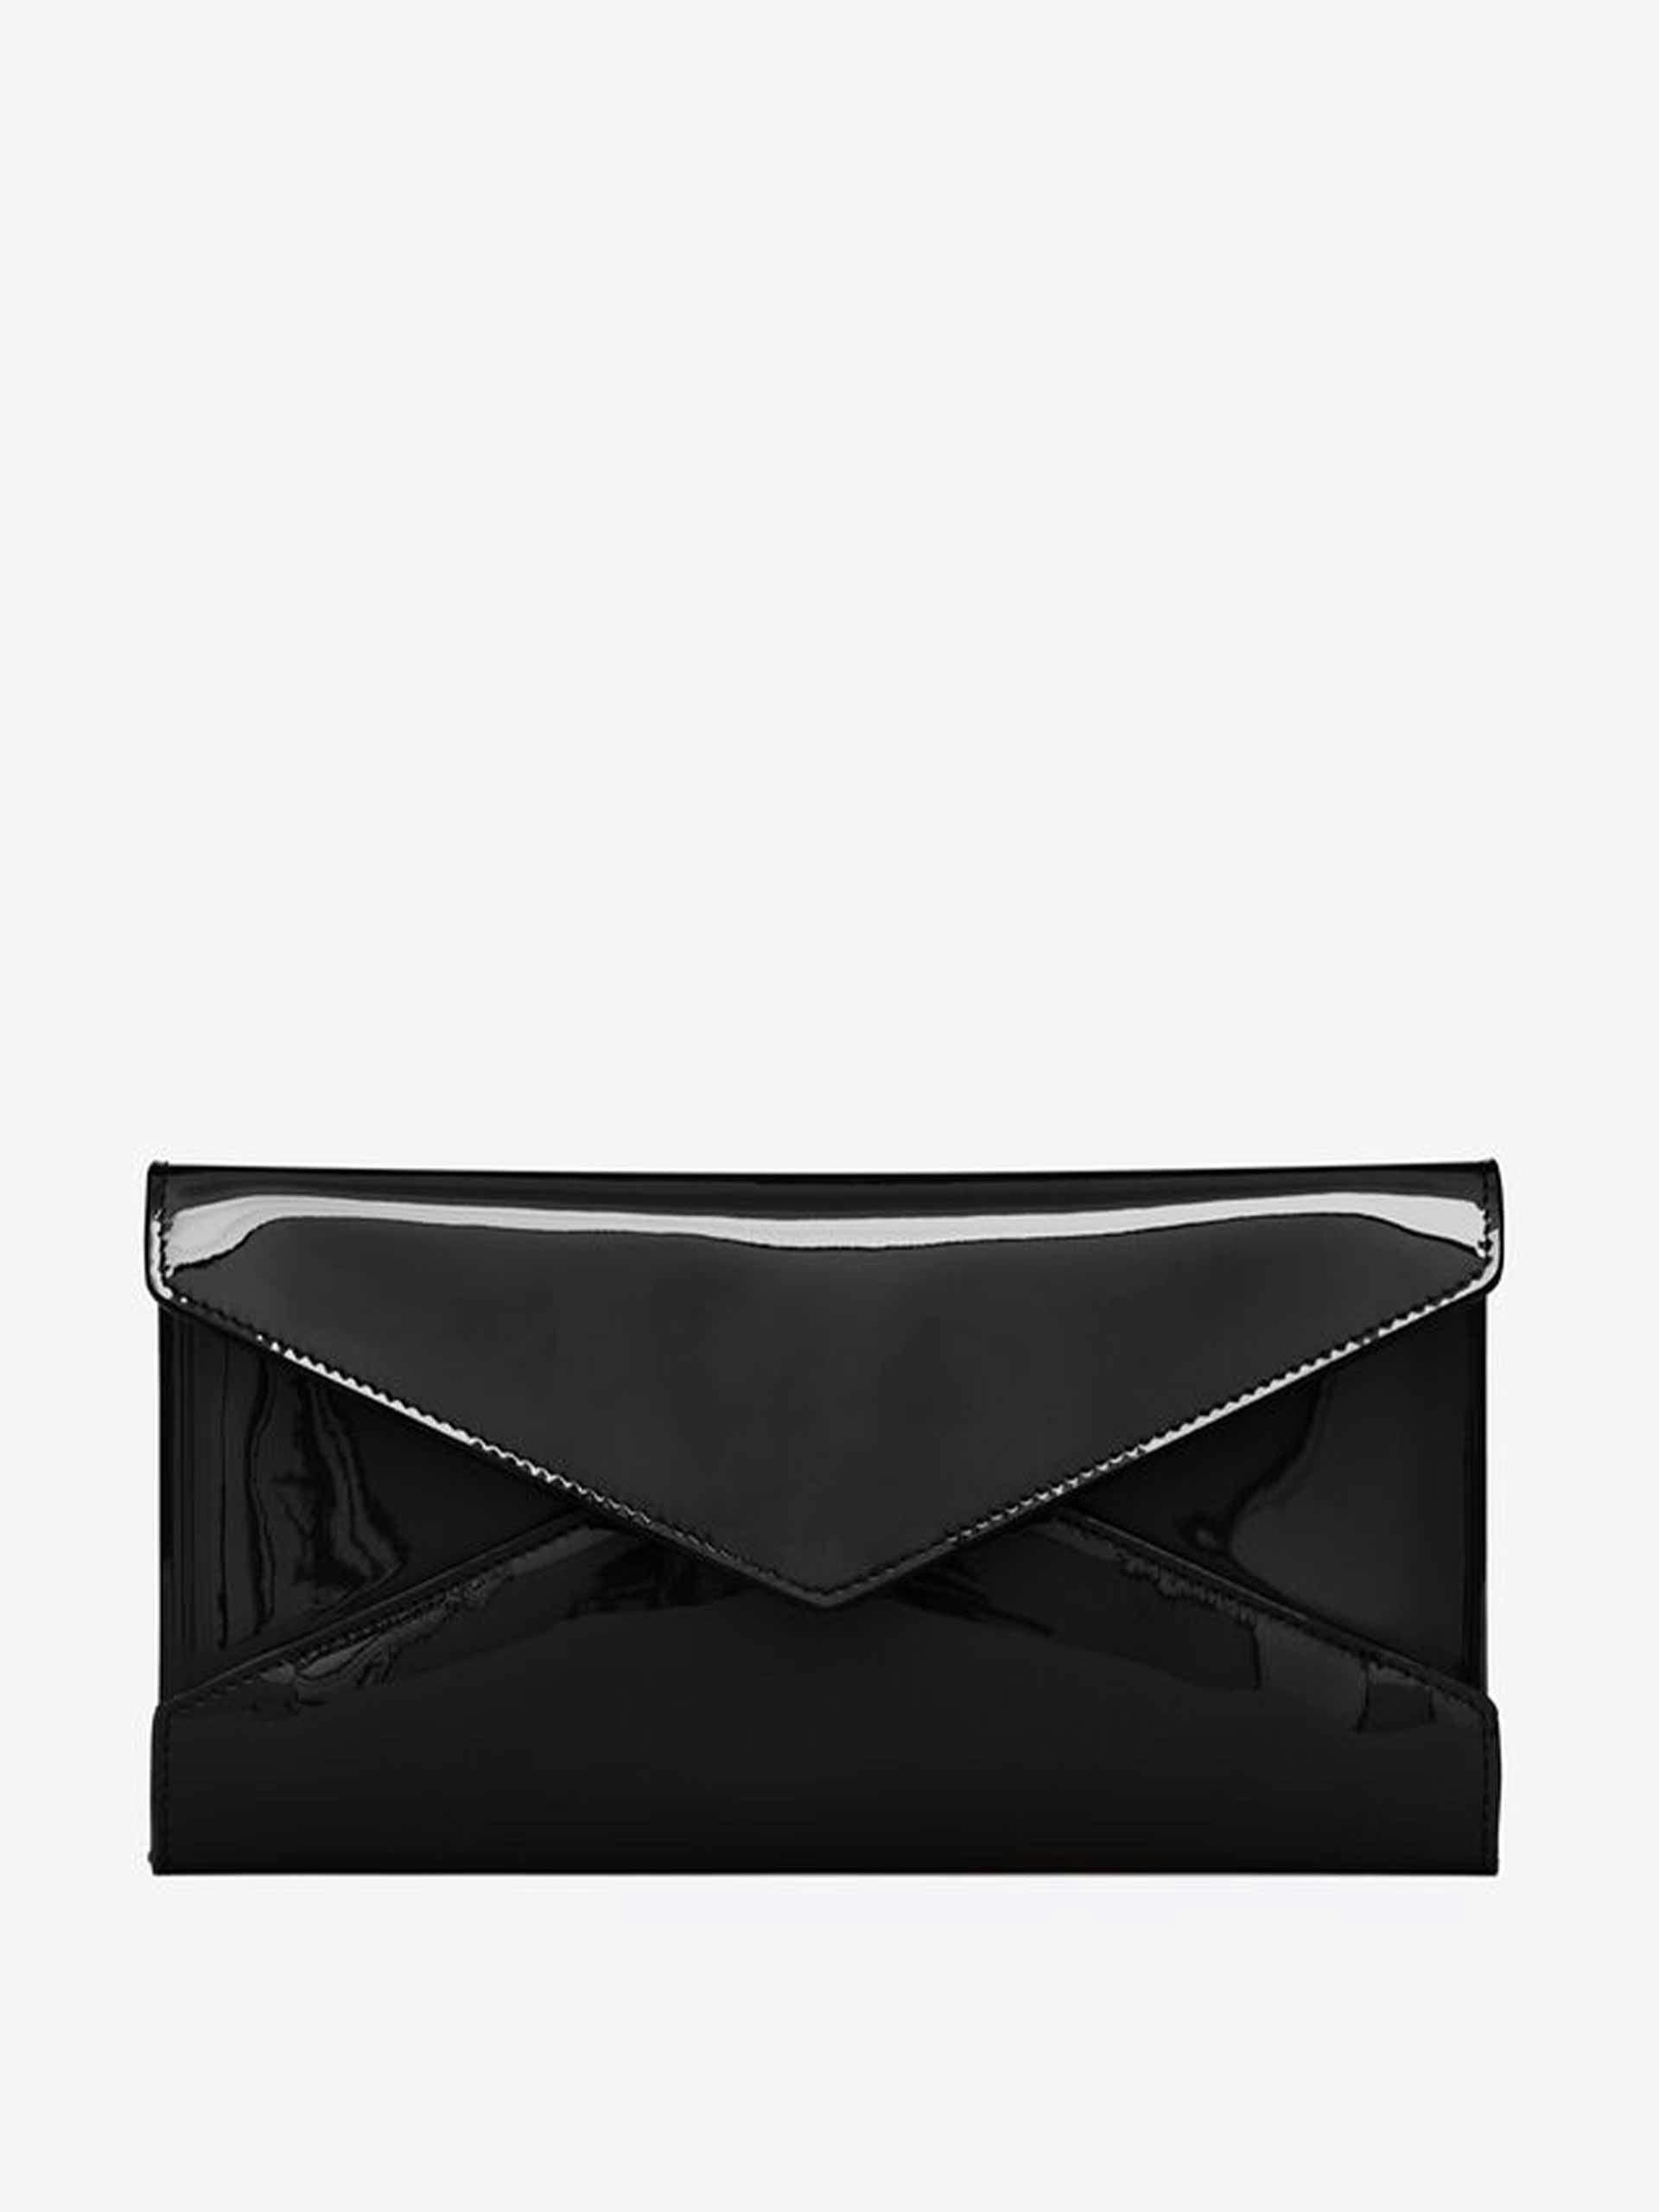 Letter pouch in patent leather